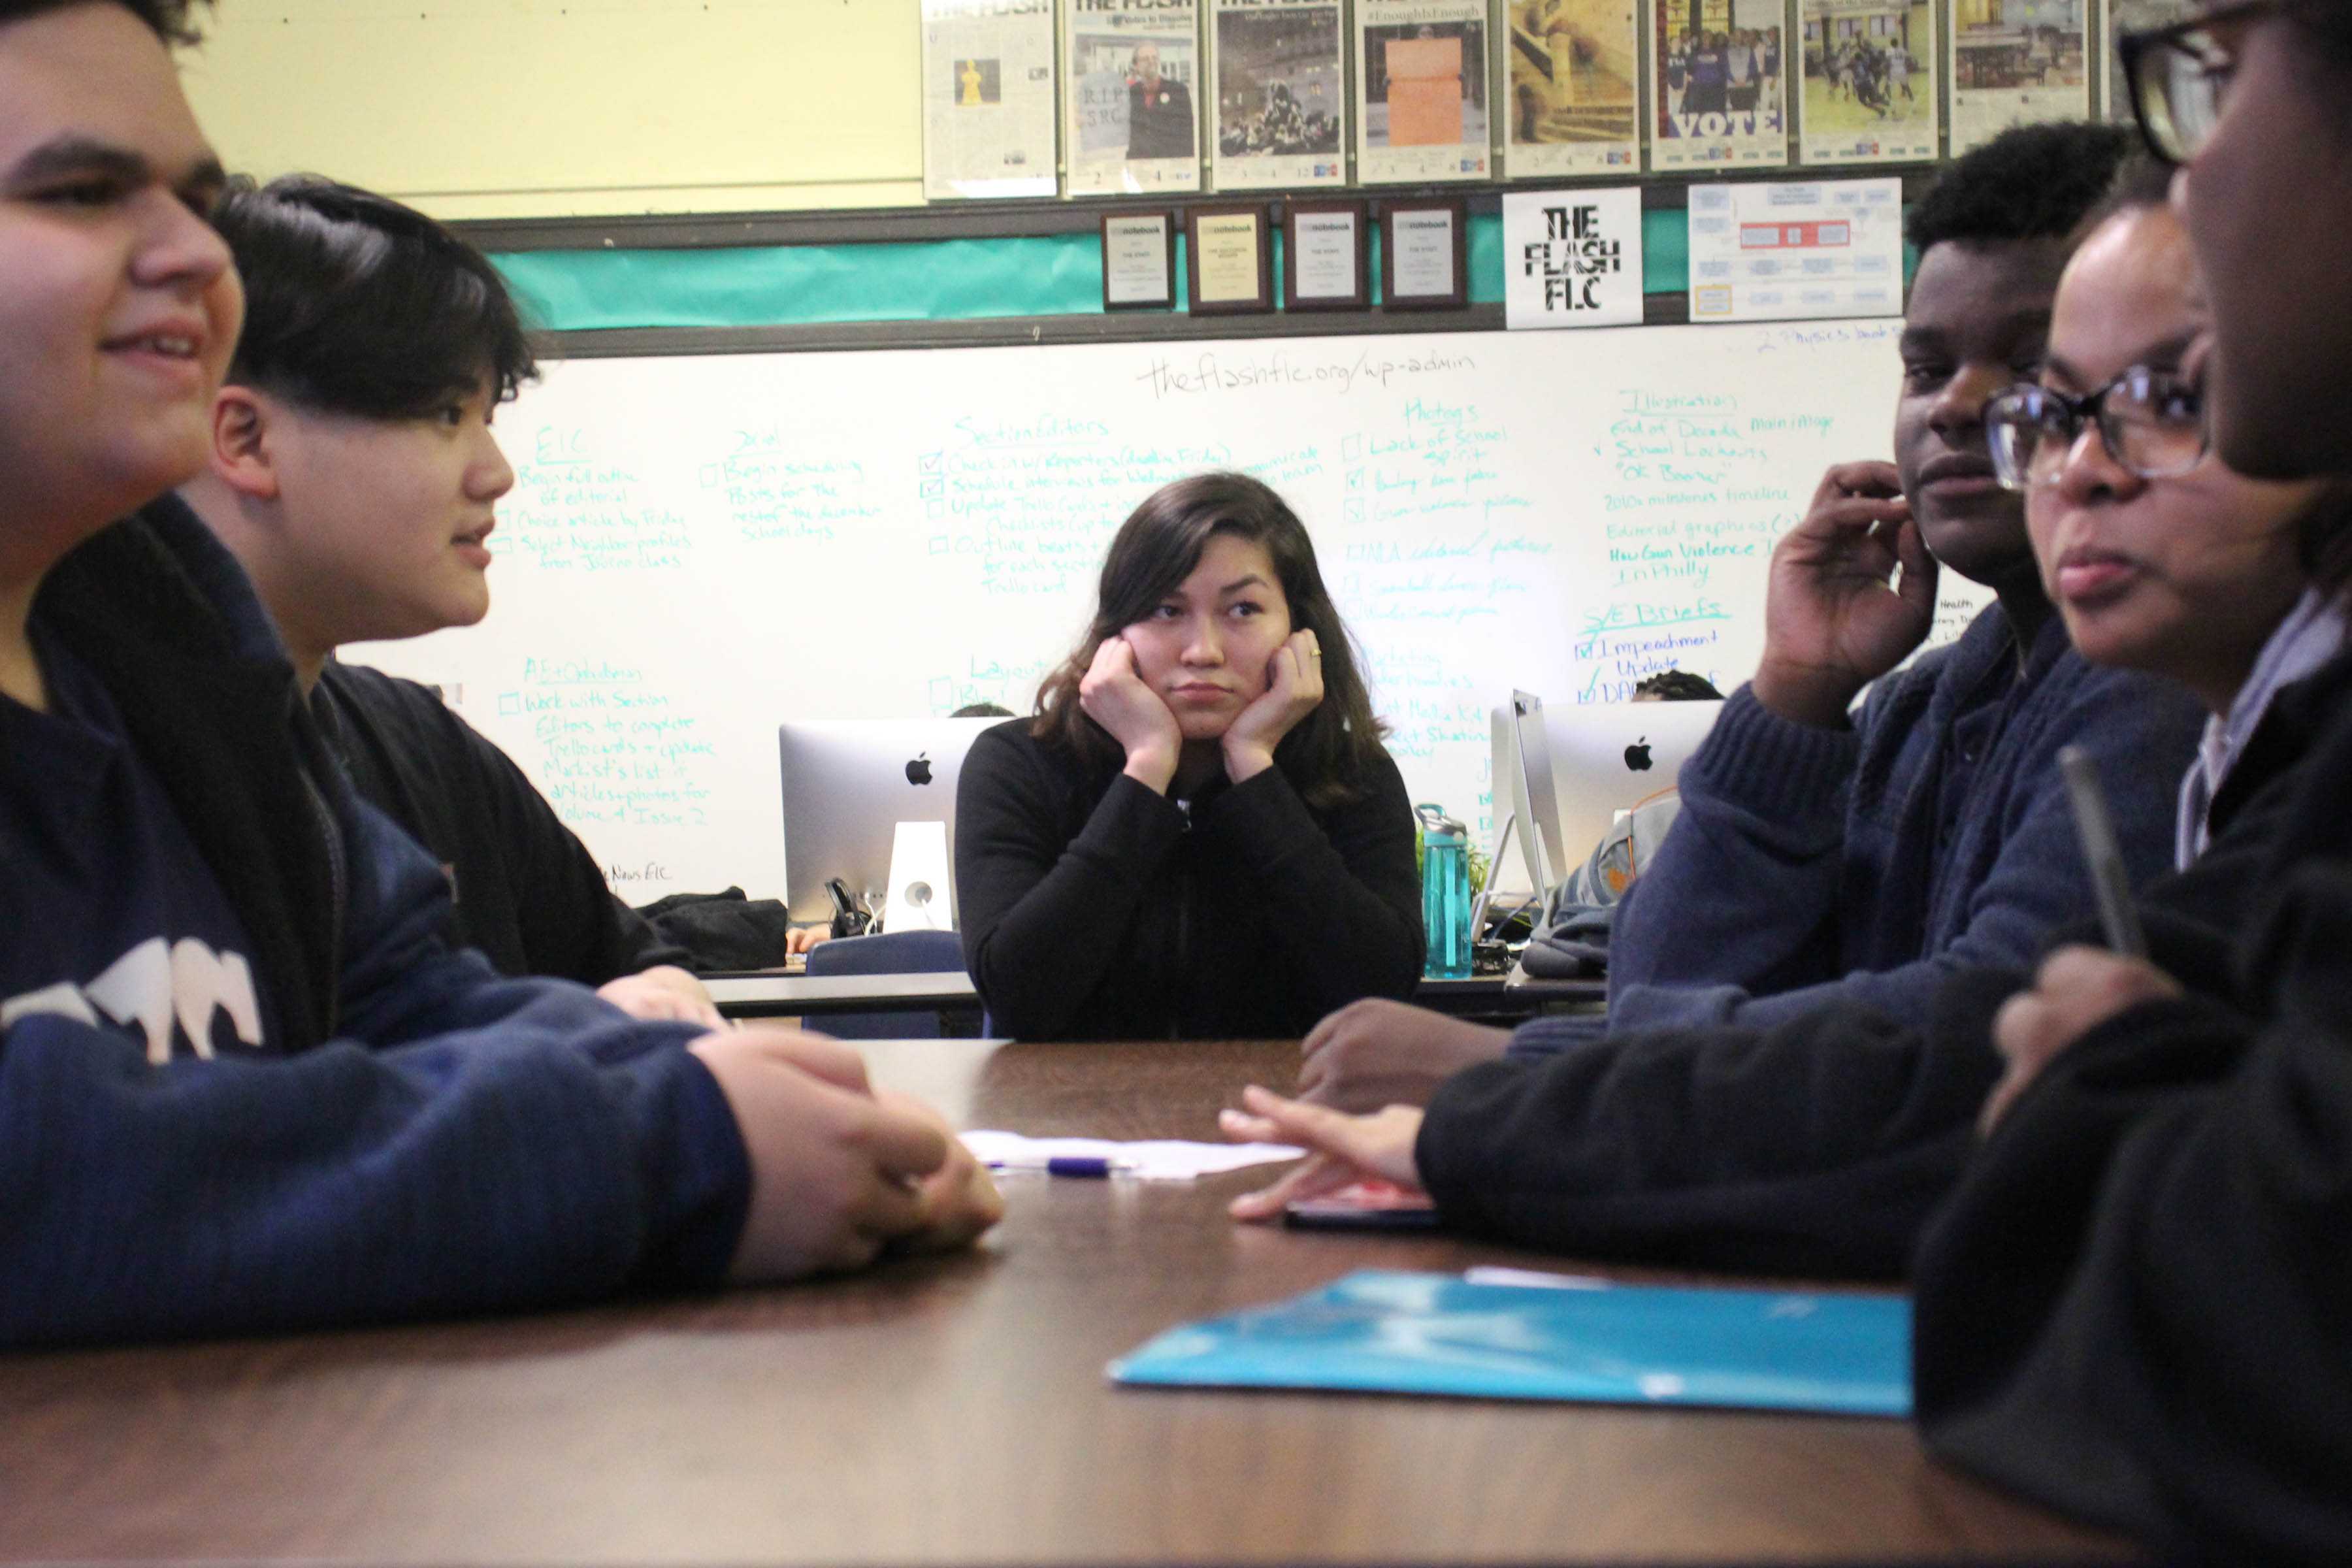 NLA senior Rosario Lemus sits excluded from the classroom discussion.